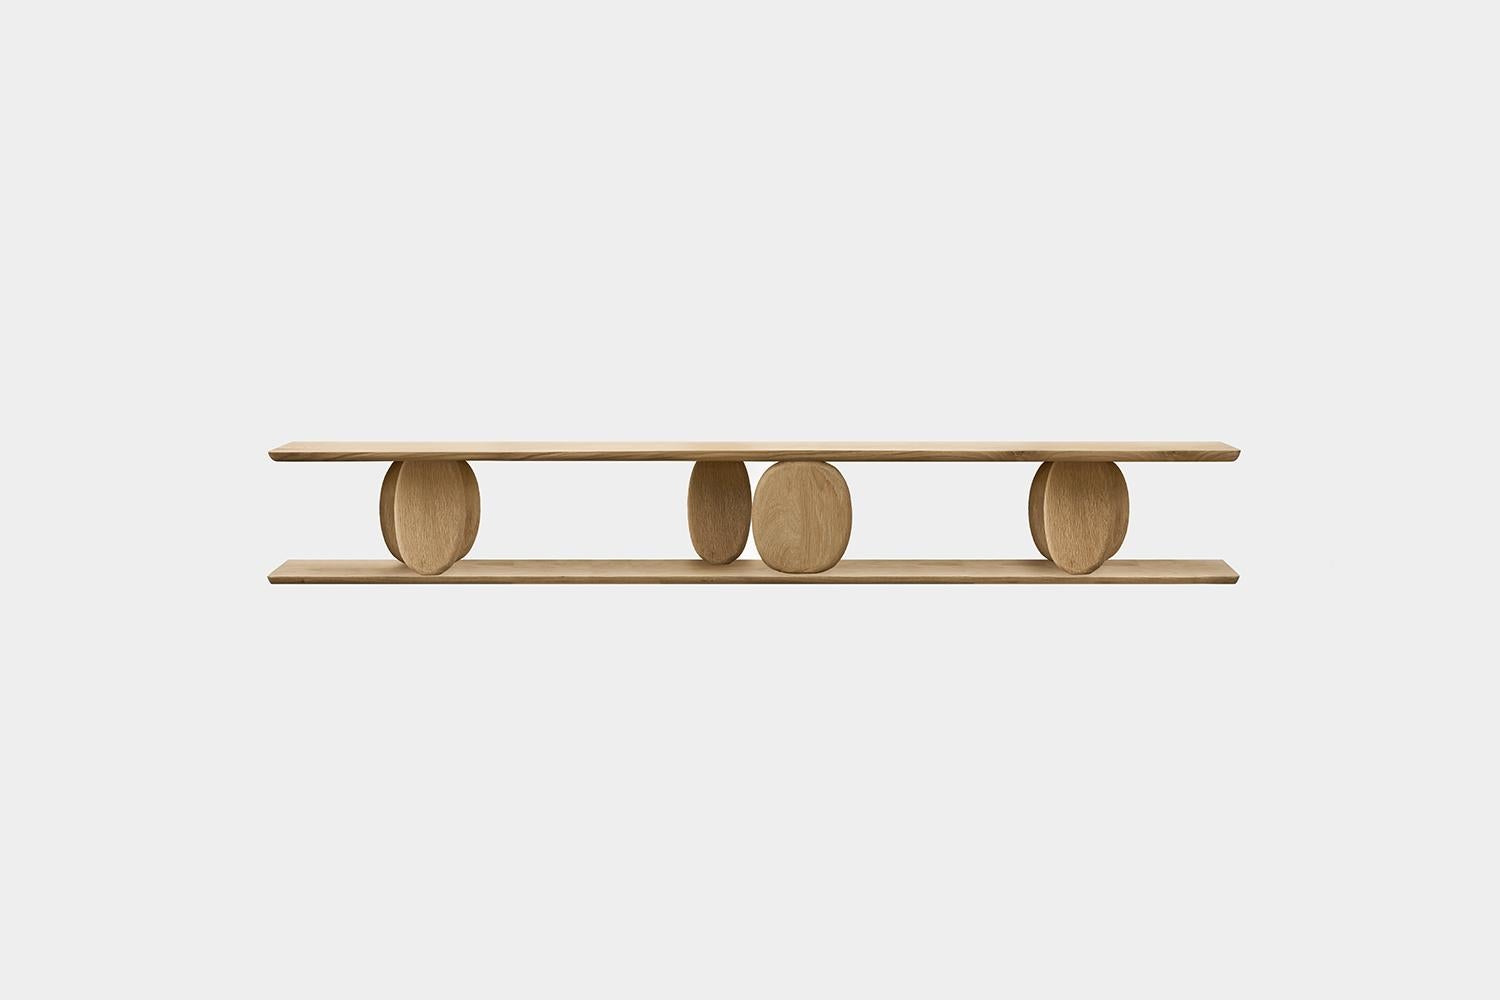 Noviembre XVIII Large Wall Shelf in Oak Wood, Floating Shelf by Joel Escalona

The Noviembre collection is inspired by the creative values of Constantin Brancusi, a Romanian sculptor considered one of the most influential artists of the twentieth